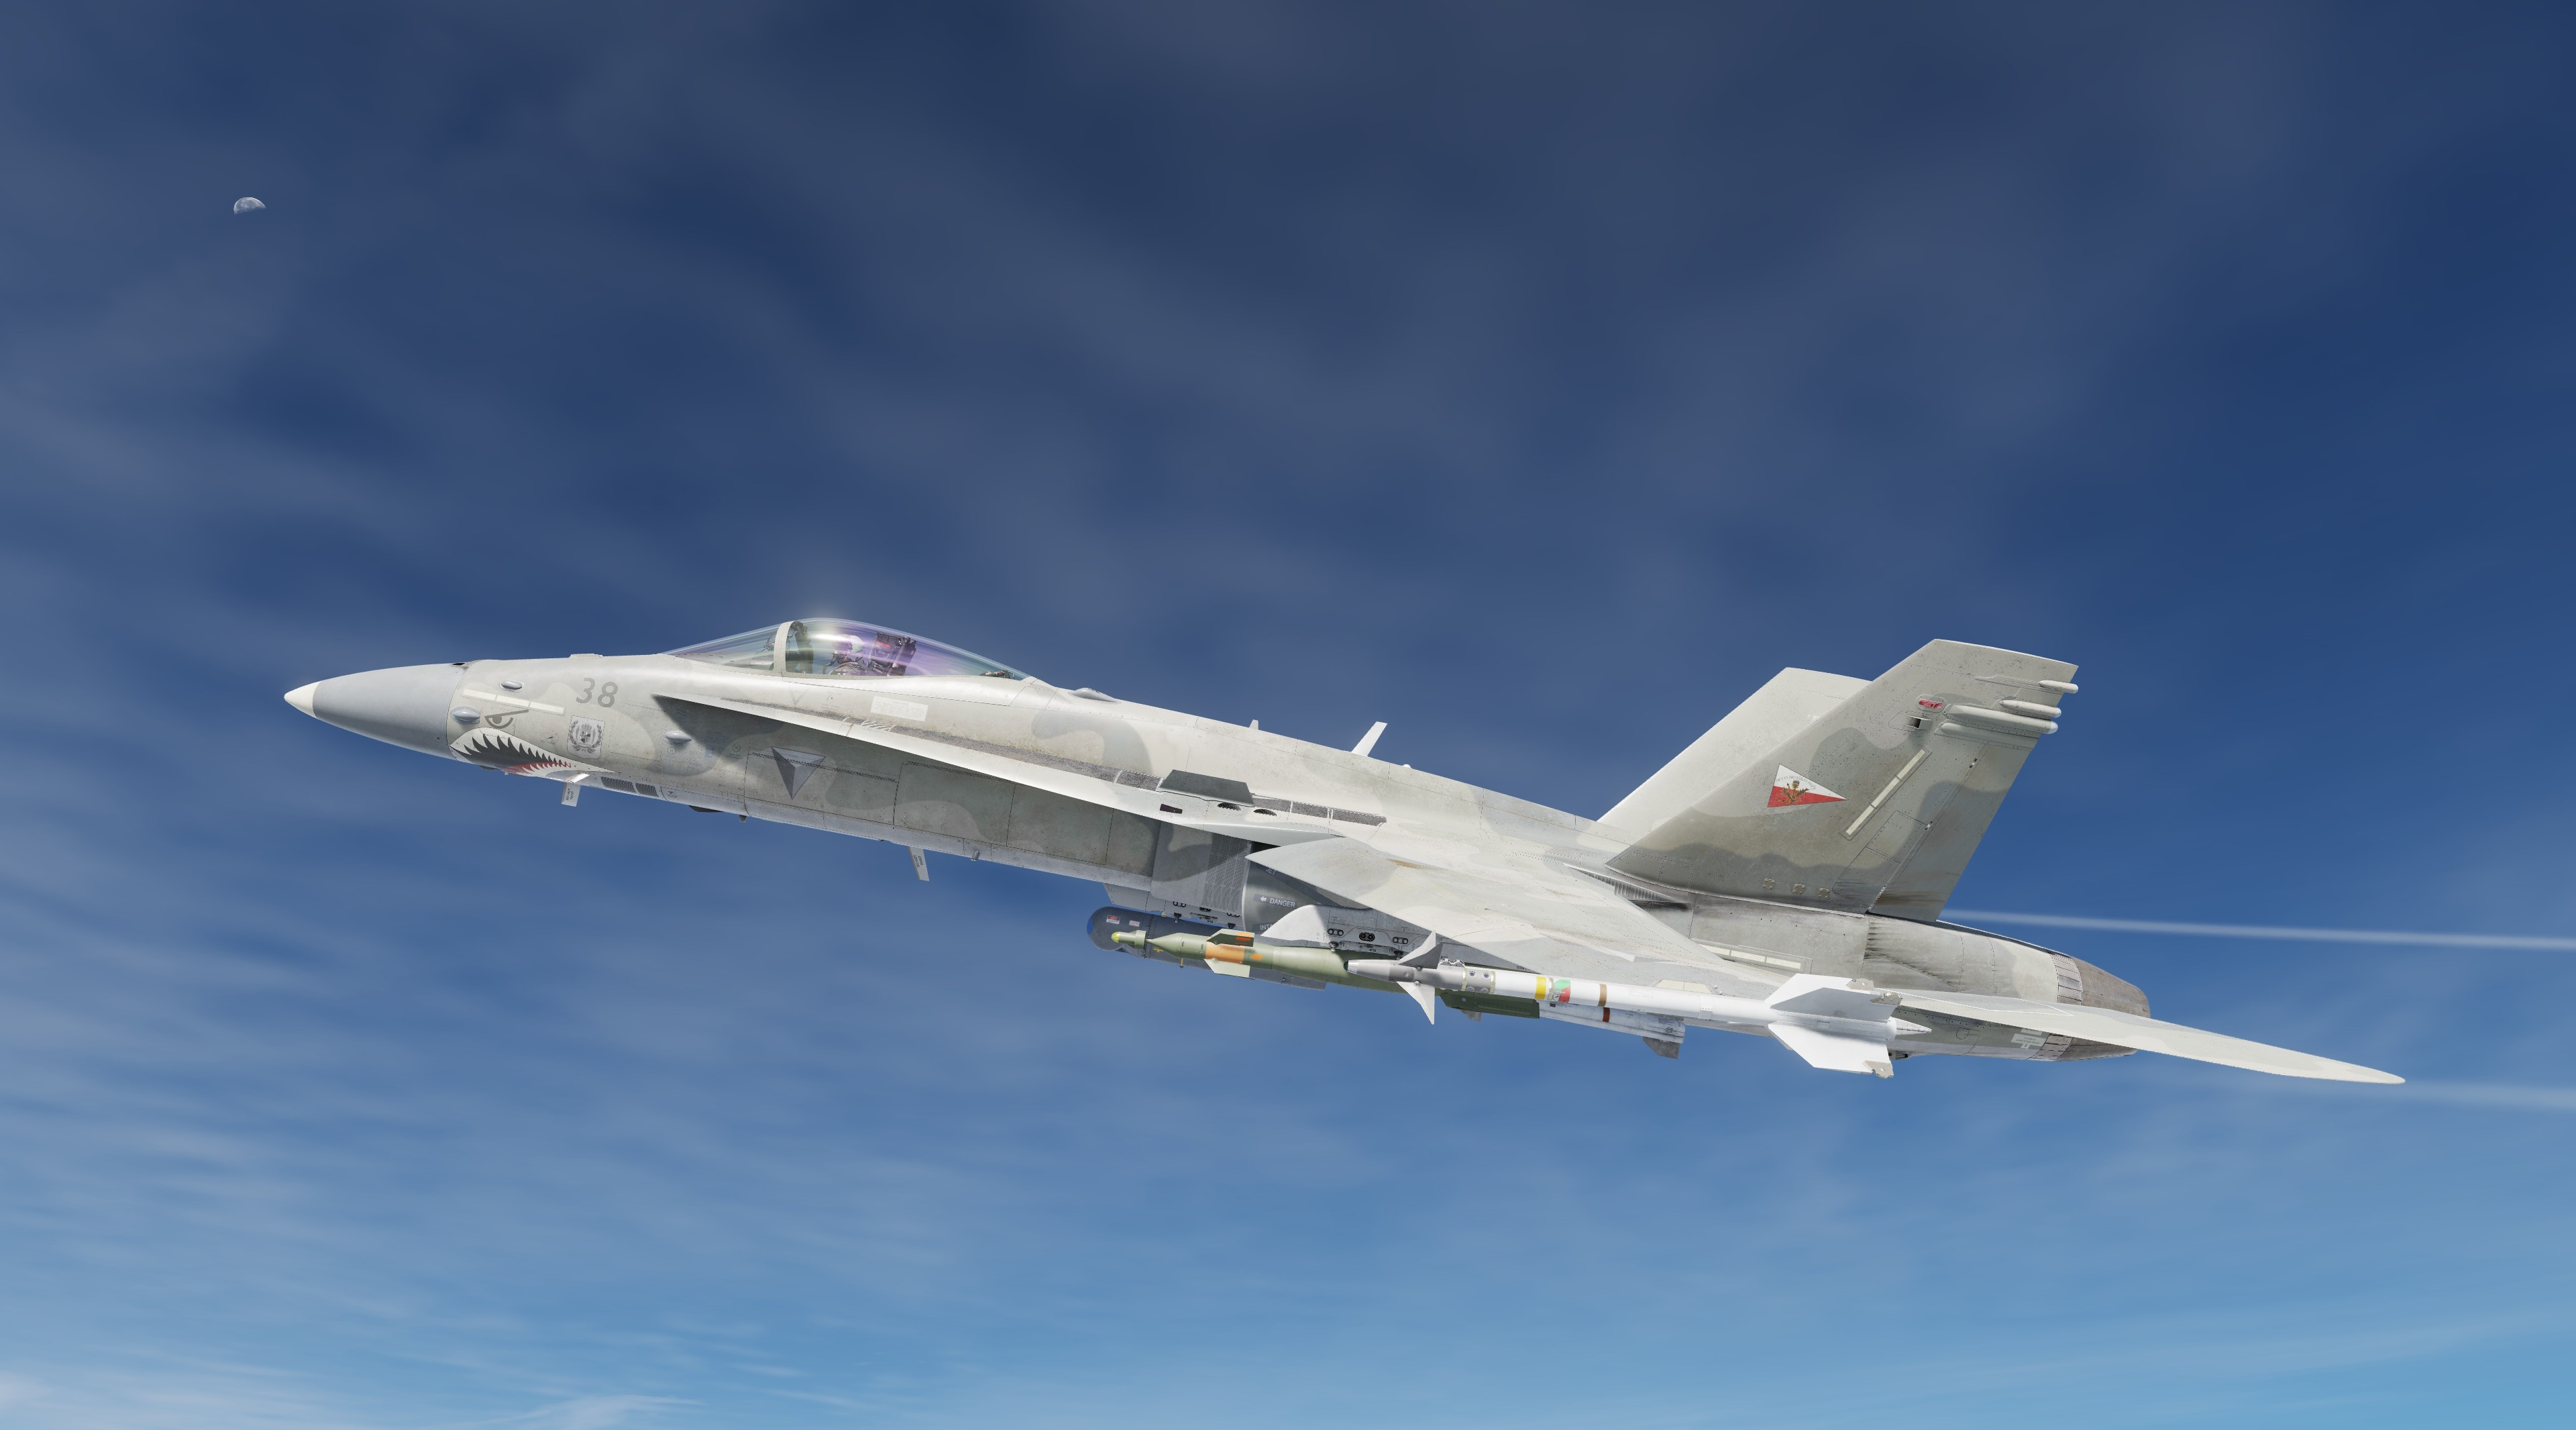 ACE COMBAT - F-18C - Nordennavic Royal Air Force - Sqn "Languedoc" V2 SPA 38